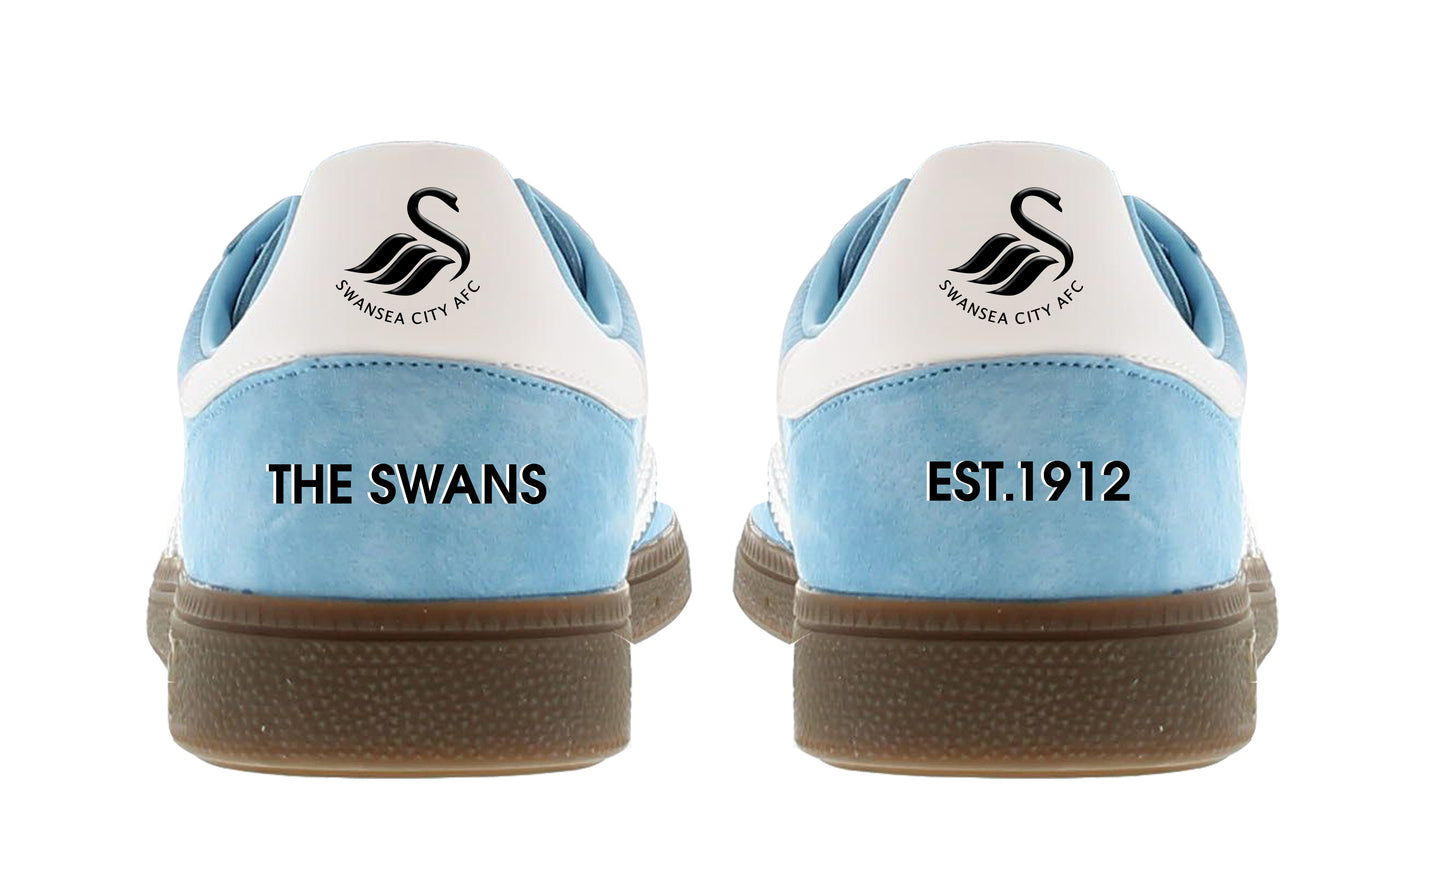 Limited edition Adidas Swansea FC Light blue / white Spezial trainers / sneakers